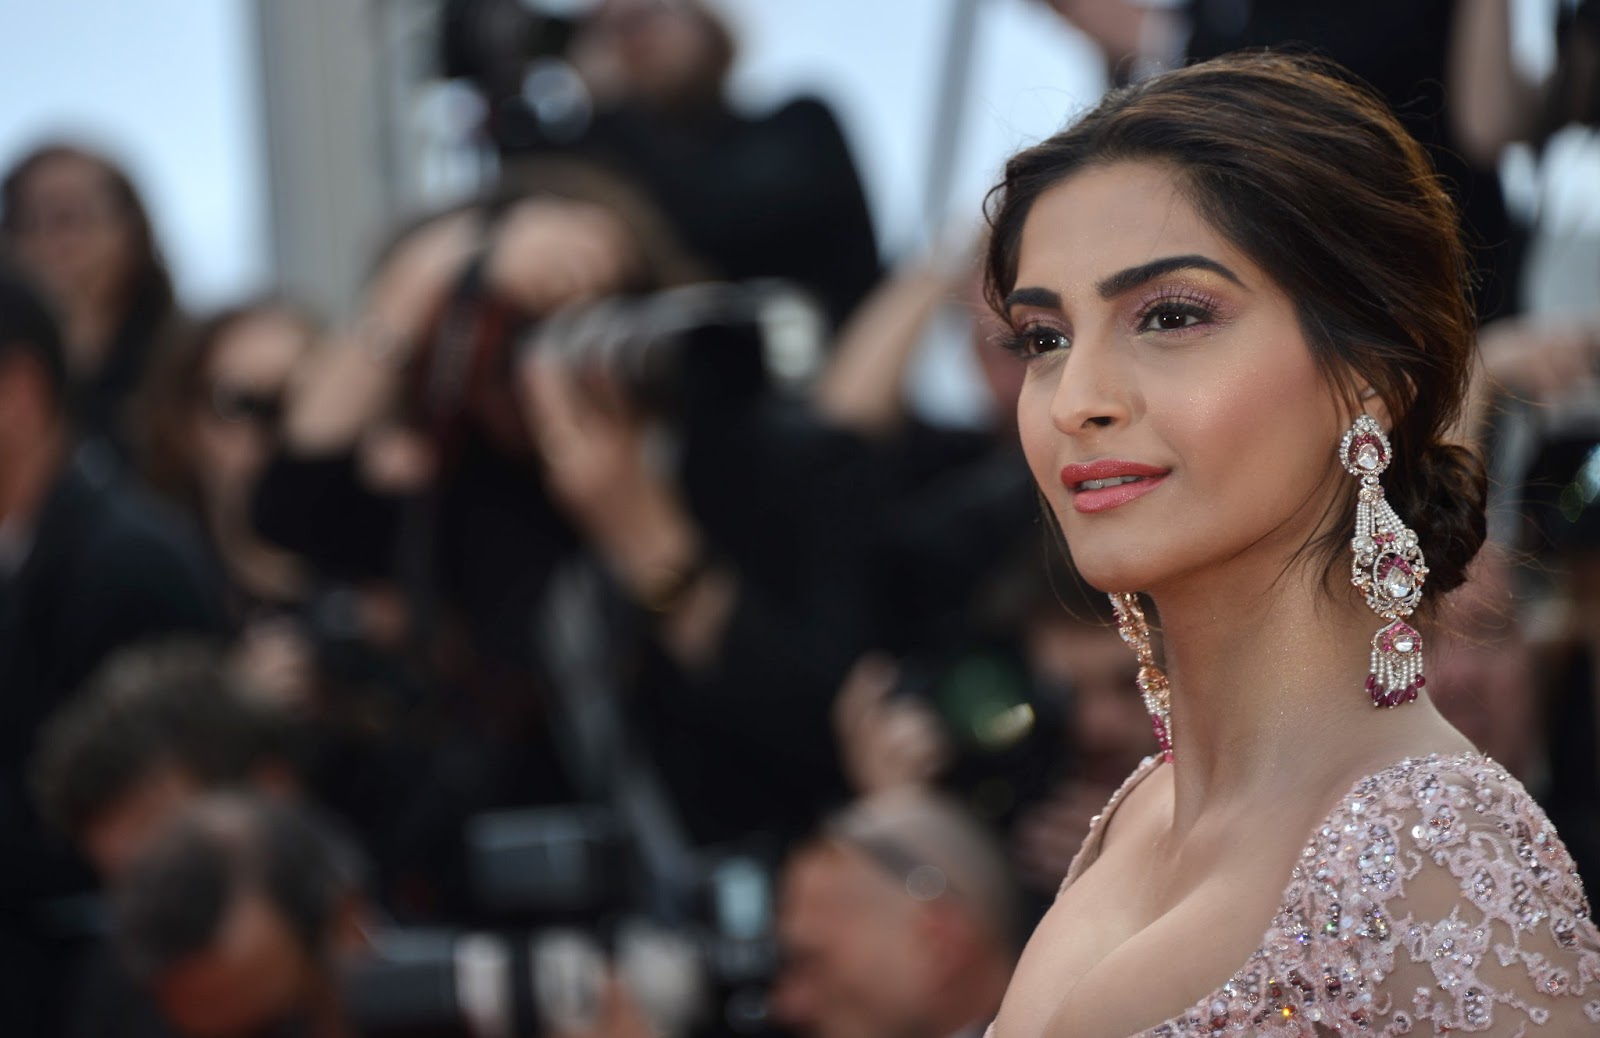 Sonam Kapoor Looks Flawless in Elie Saab Peach Gown At 'The Meyerowitz Stories' Premiere During The 70th Cannes Film Festival 2017